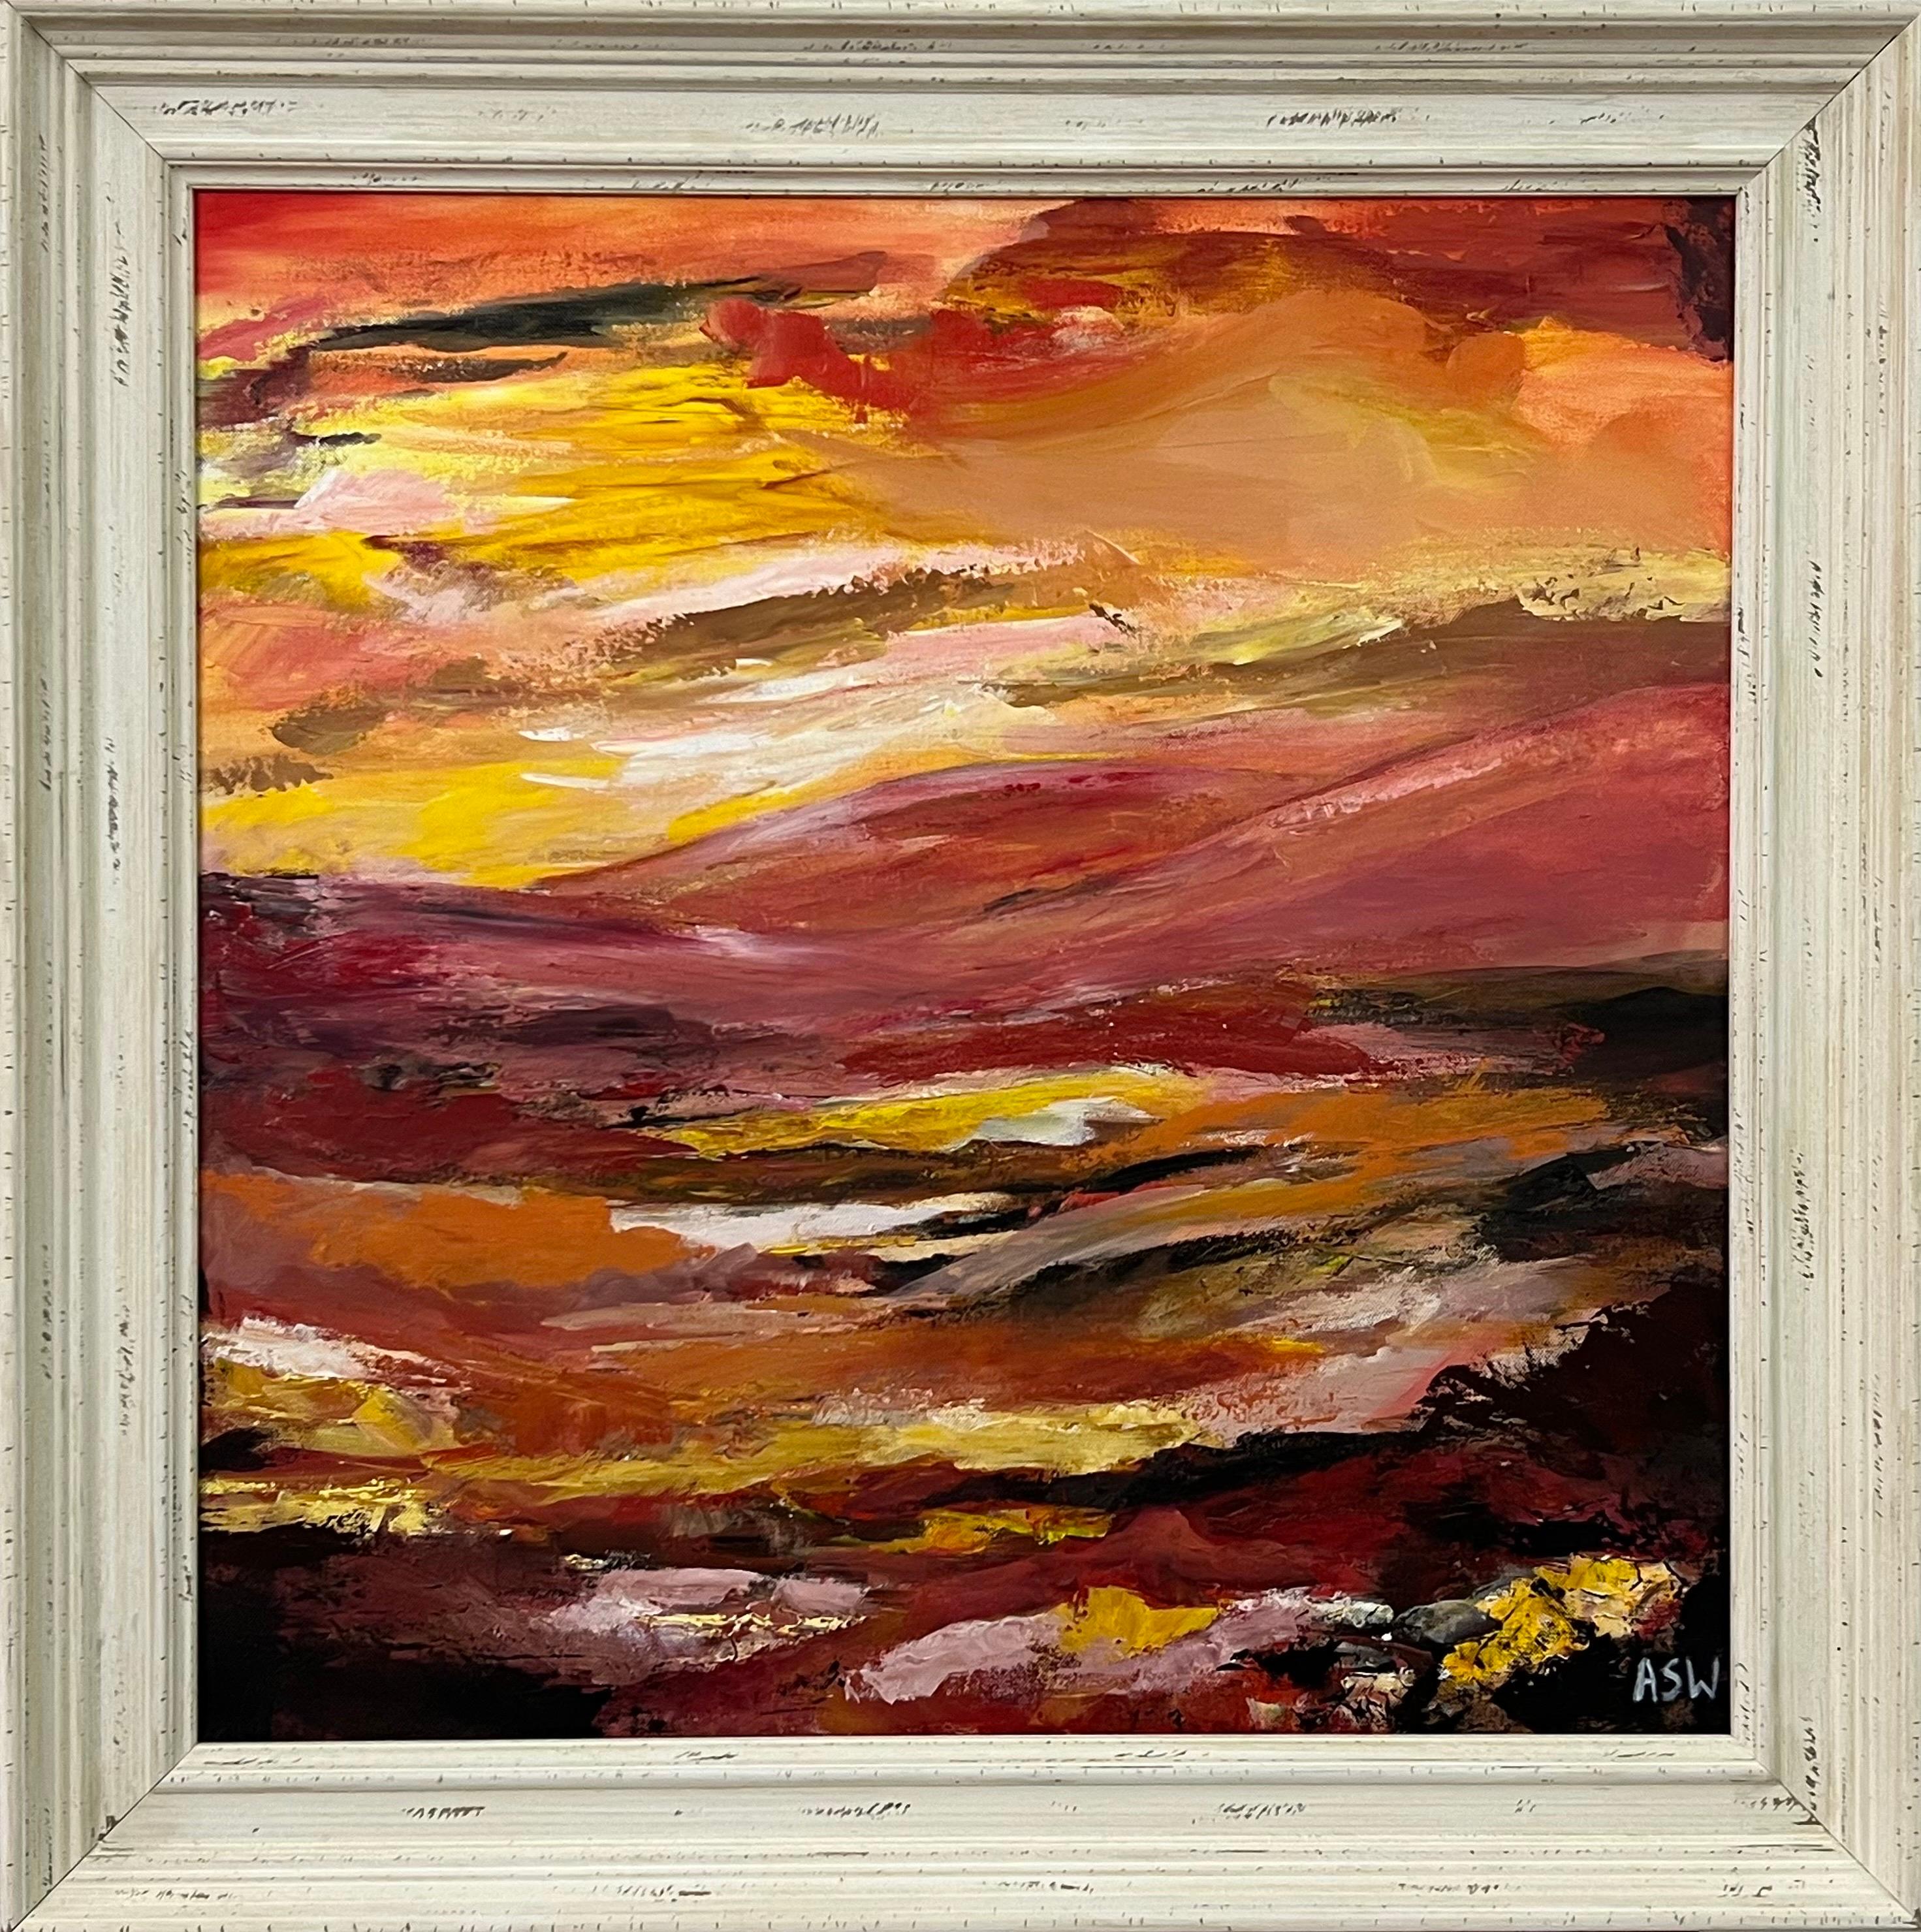 Warm Red & Yellow Abstract Landscape Painting by Contemporary British Artist